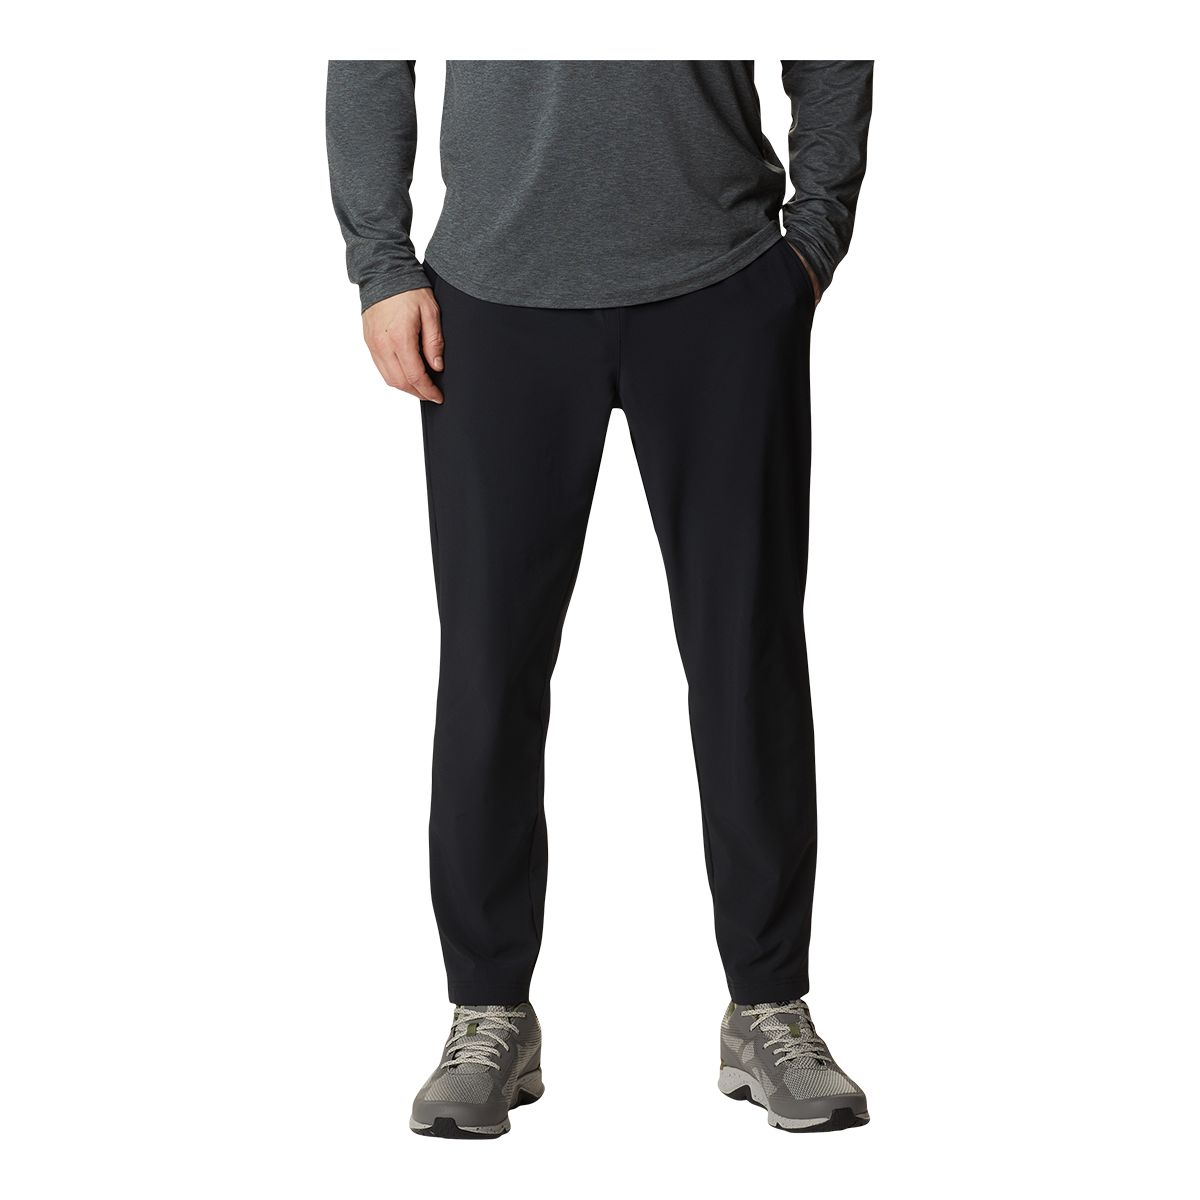 Image of Columbia Men's Hike Lined Pants